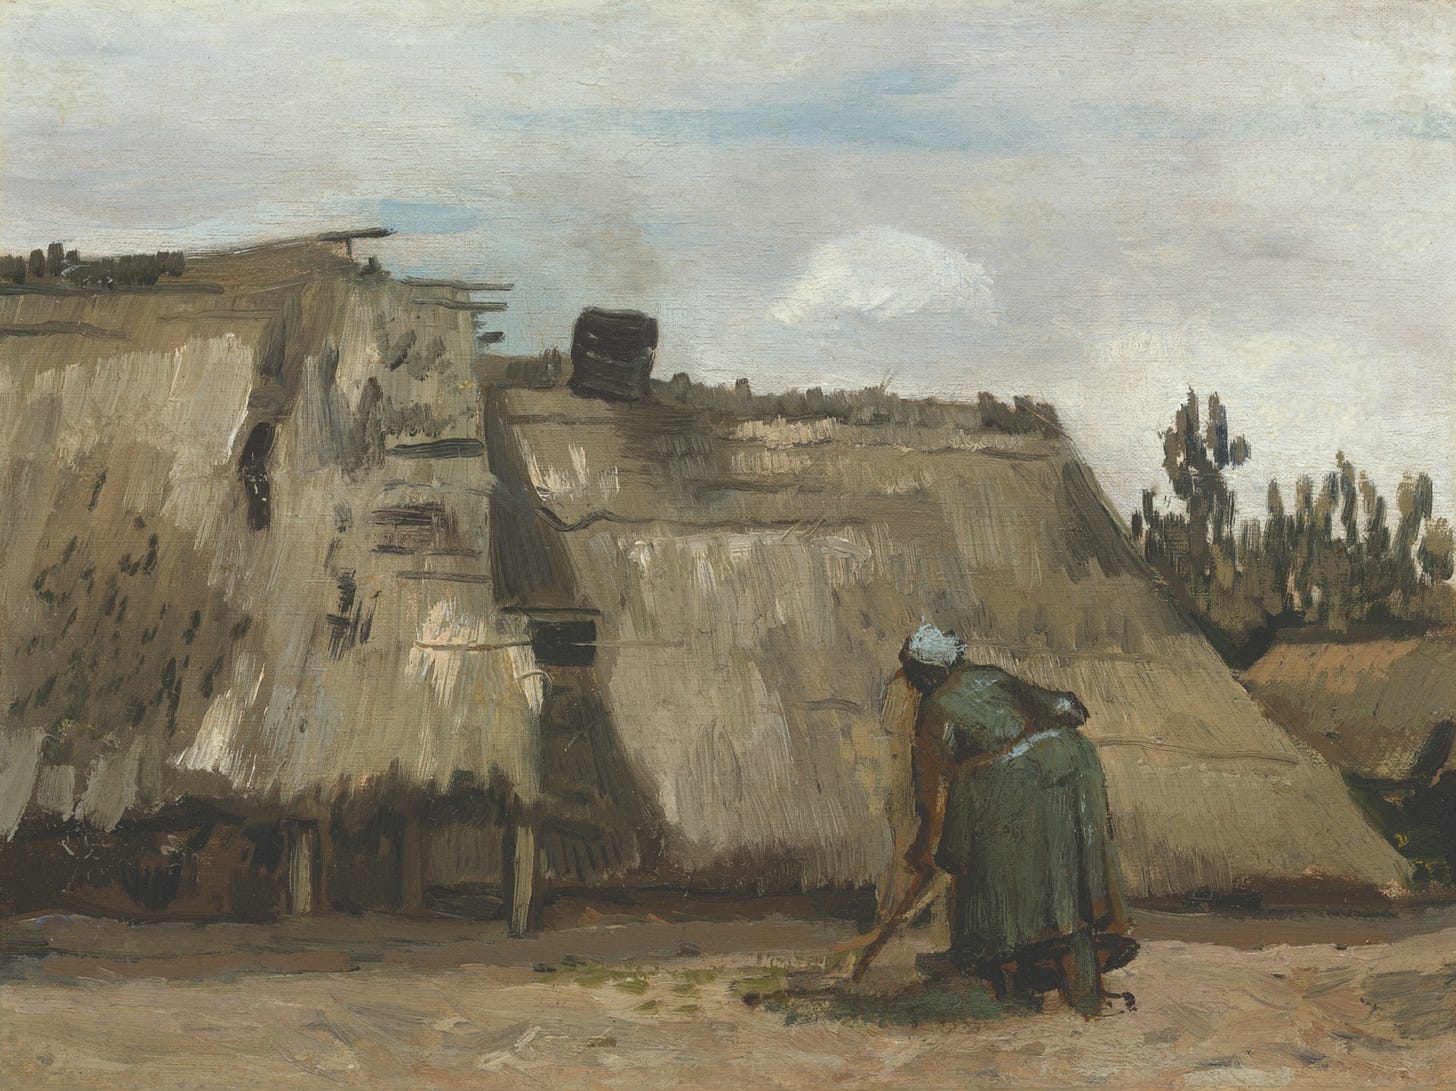 Painting of a peasant woman hoeing in front of thatched roof dwelling